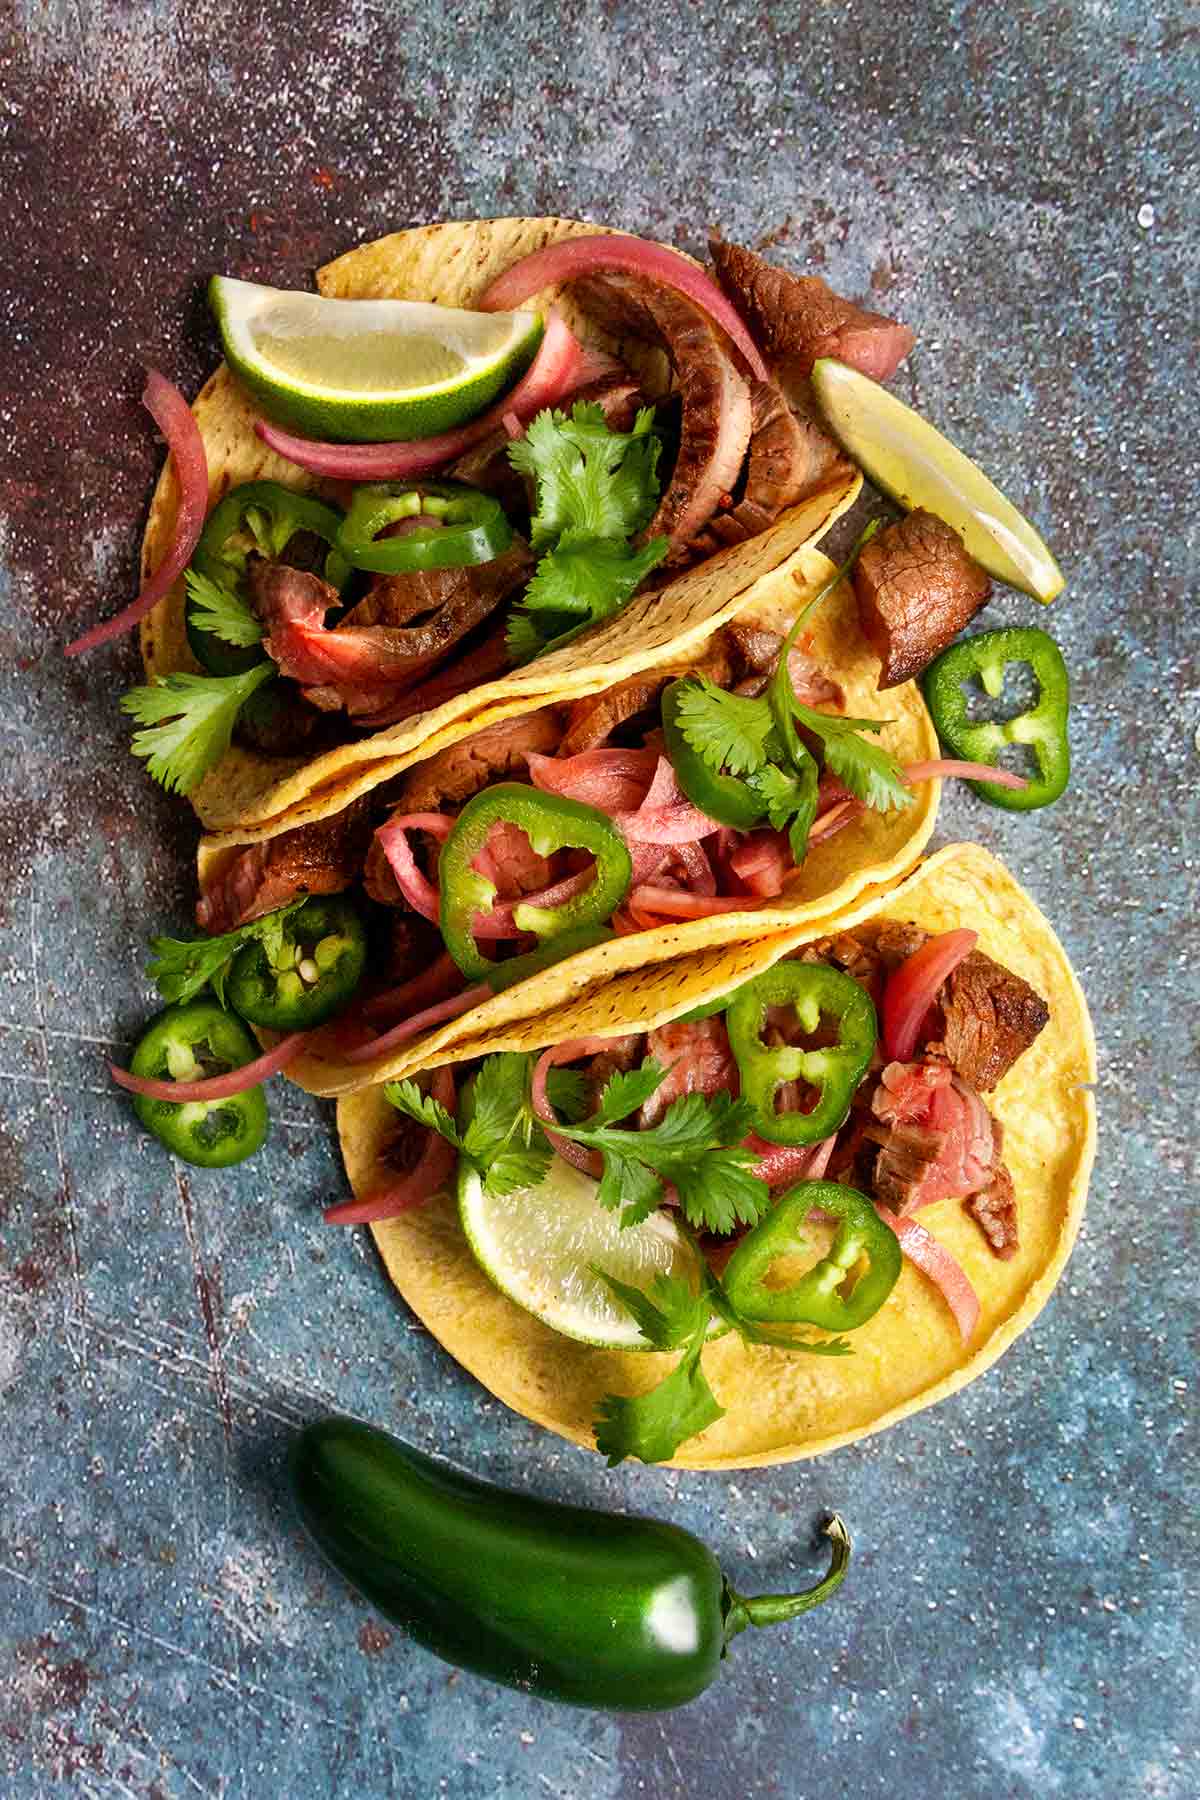 Three skirt steak tacos filled with sliced steak, jalapeño, pickled onion, lime, and cilantro.